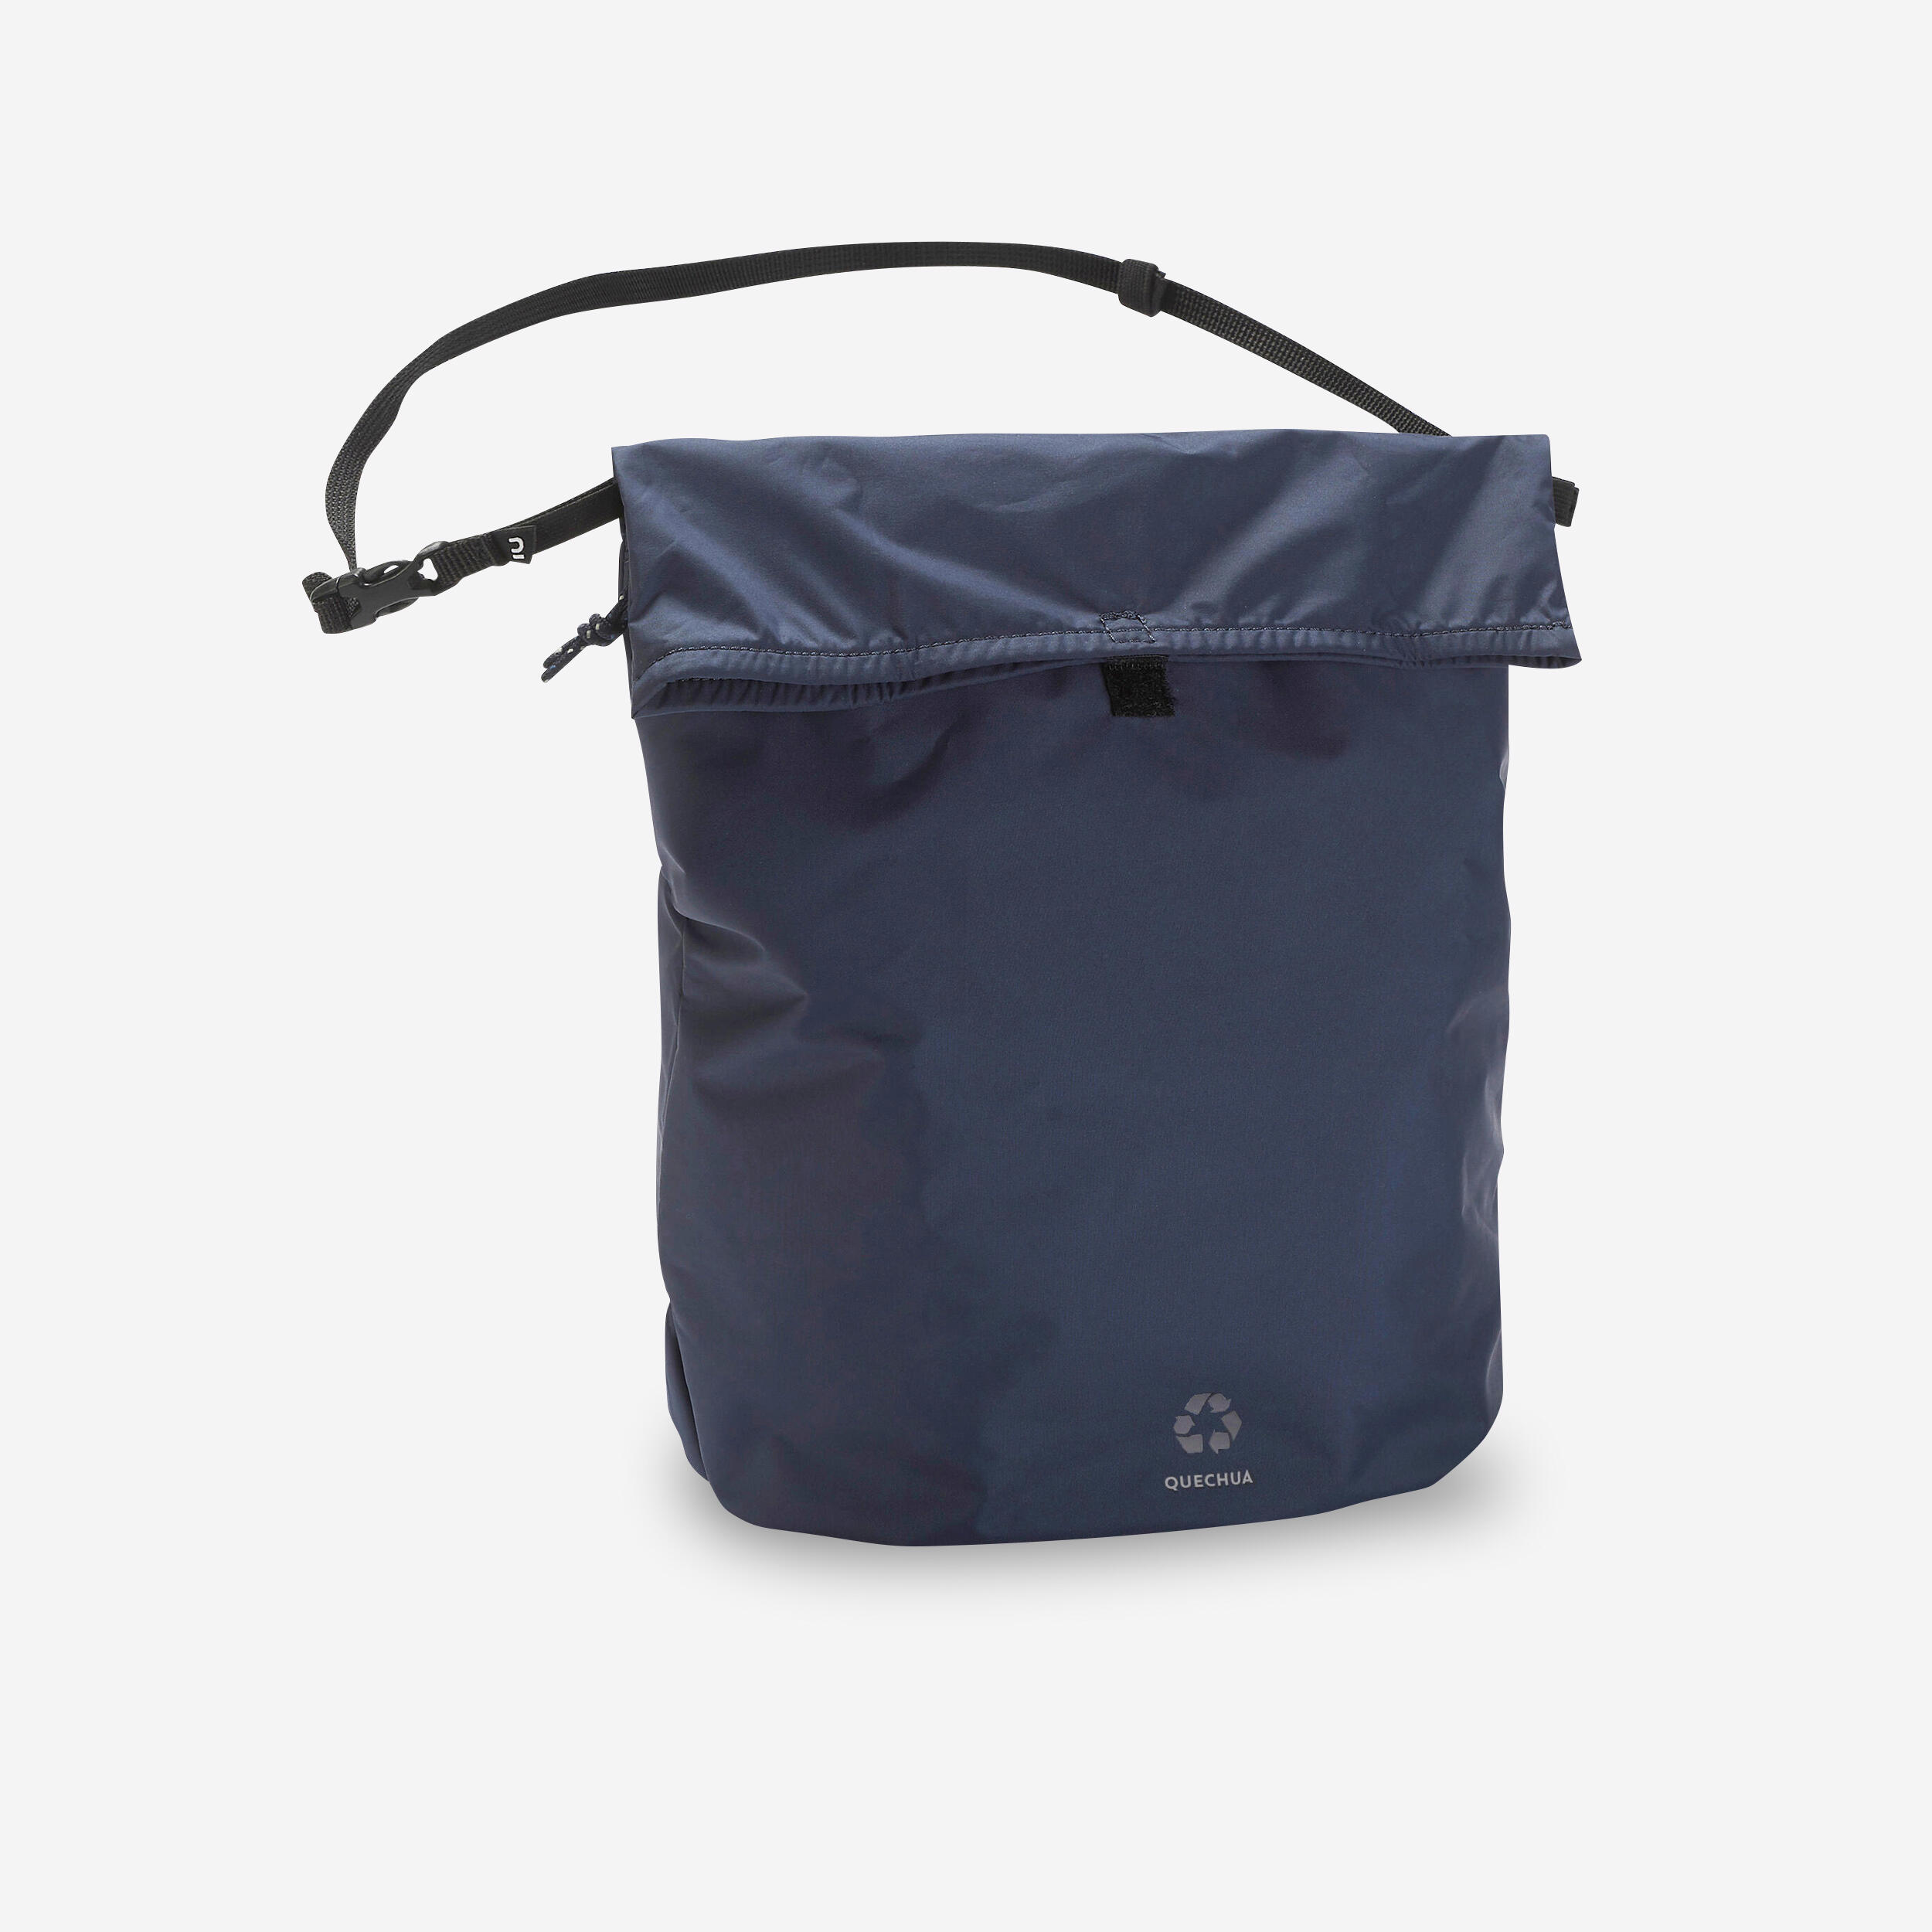 QUECHUA Waste sorting bag - 10 L - Hiking and camping